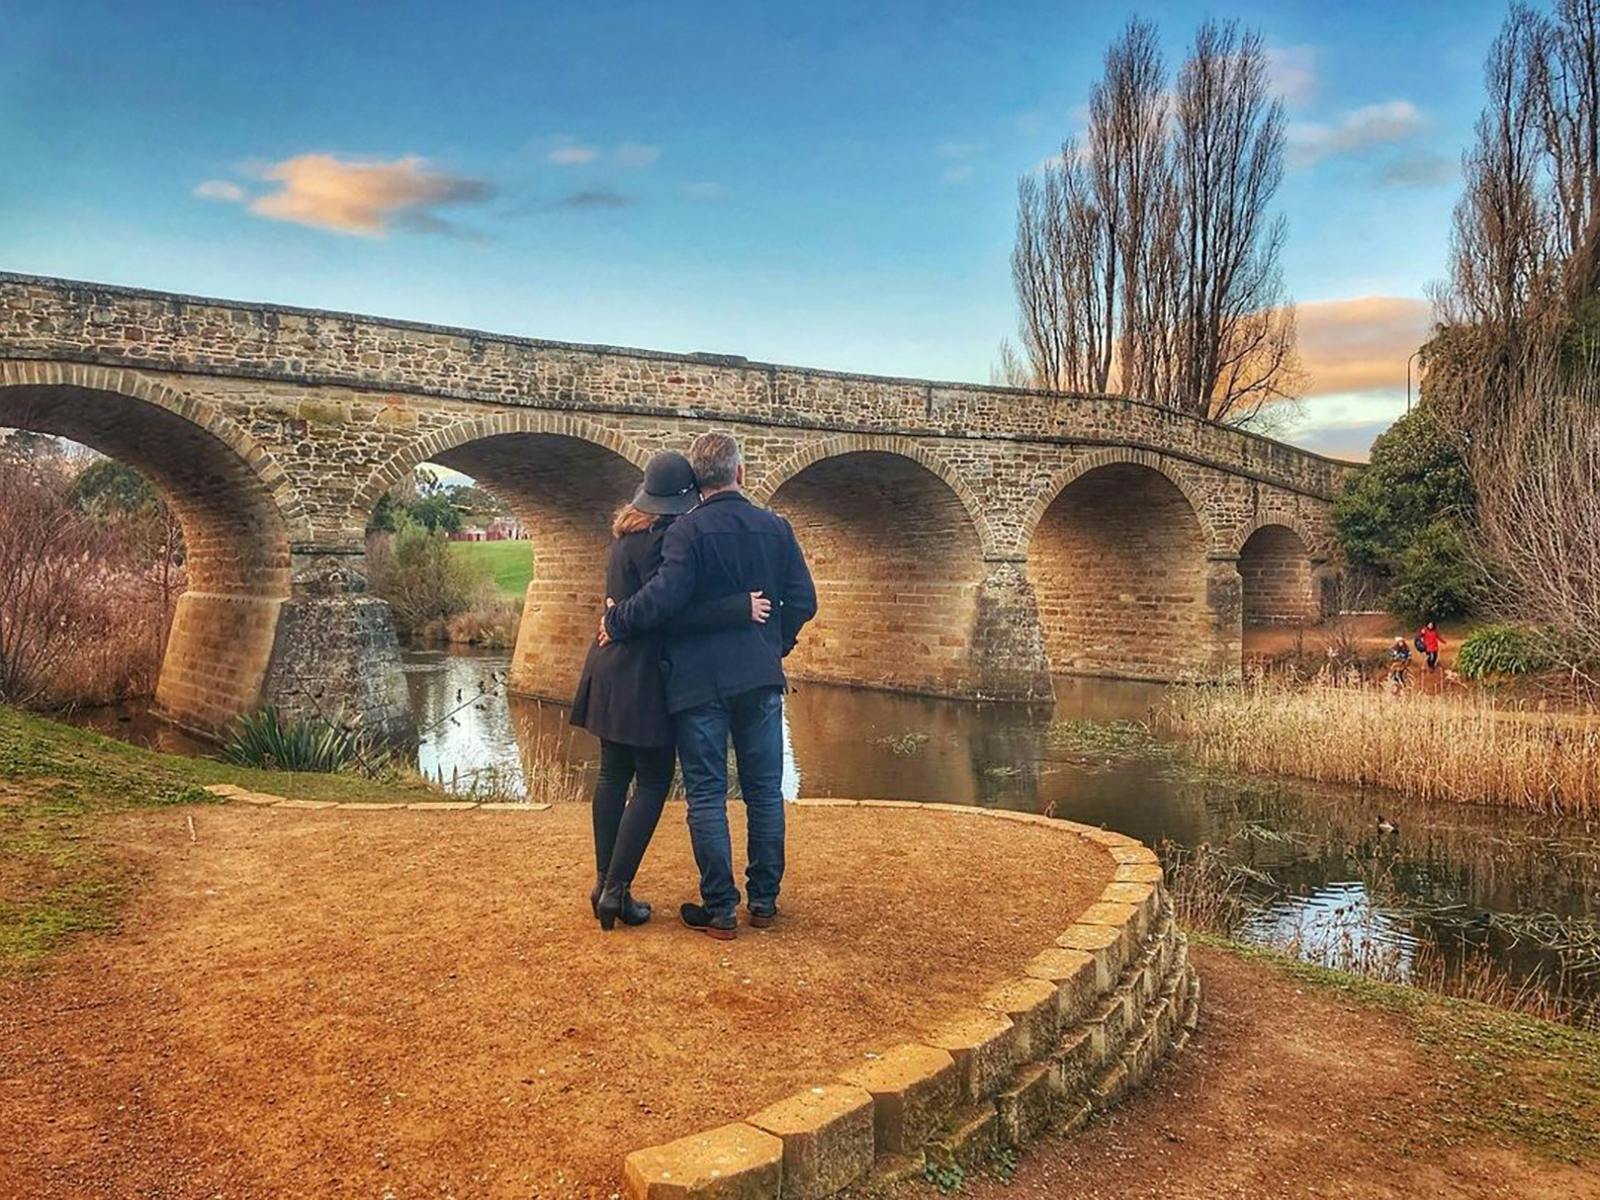 "Romantic couple embraces in front of Richmond Bridge, enveloped in serene solitude. Their tender mo